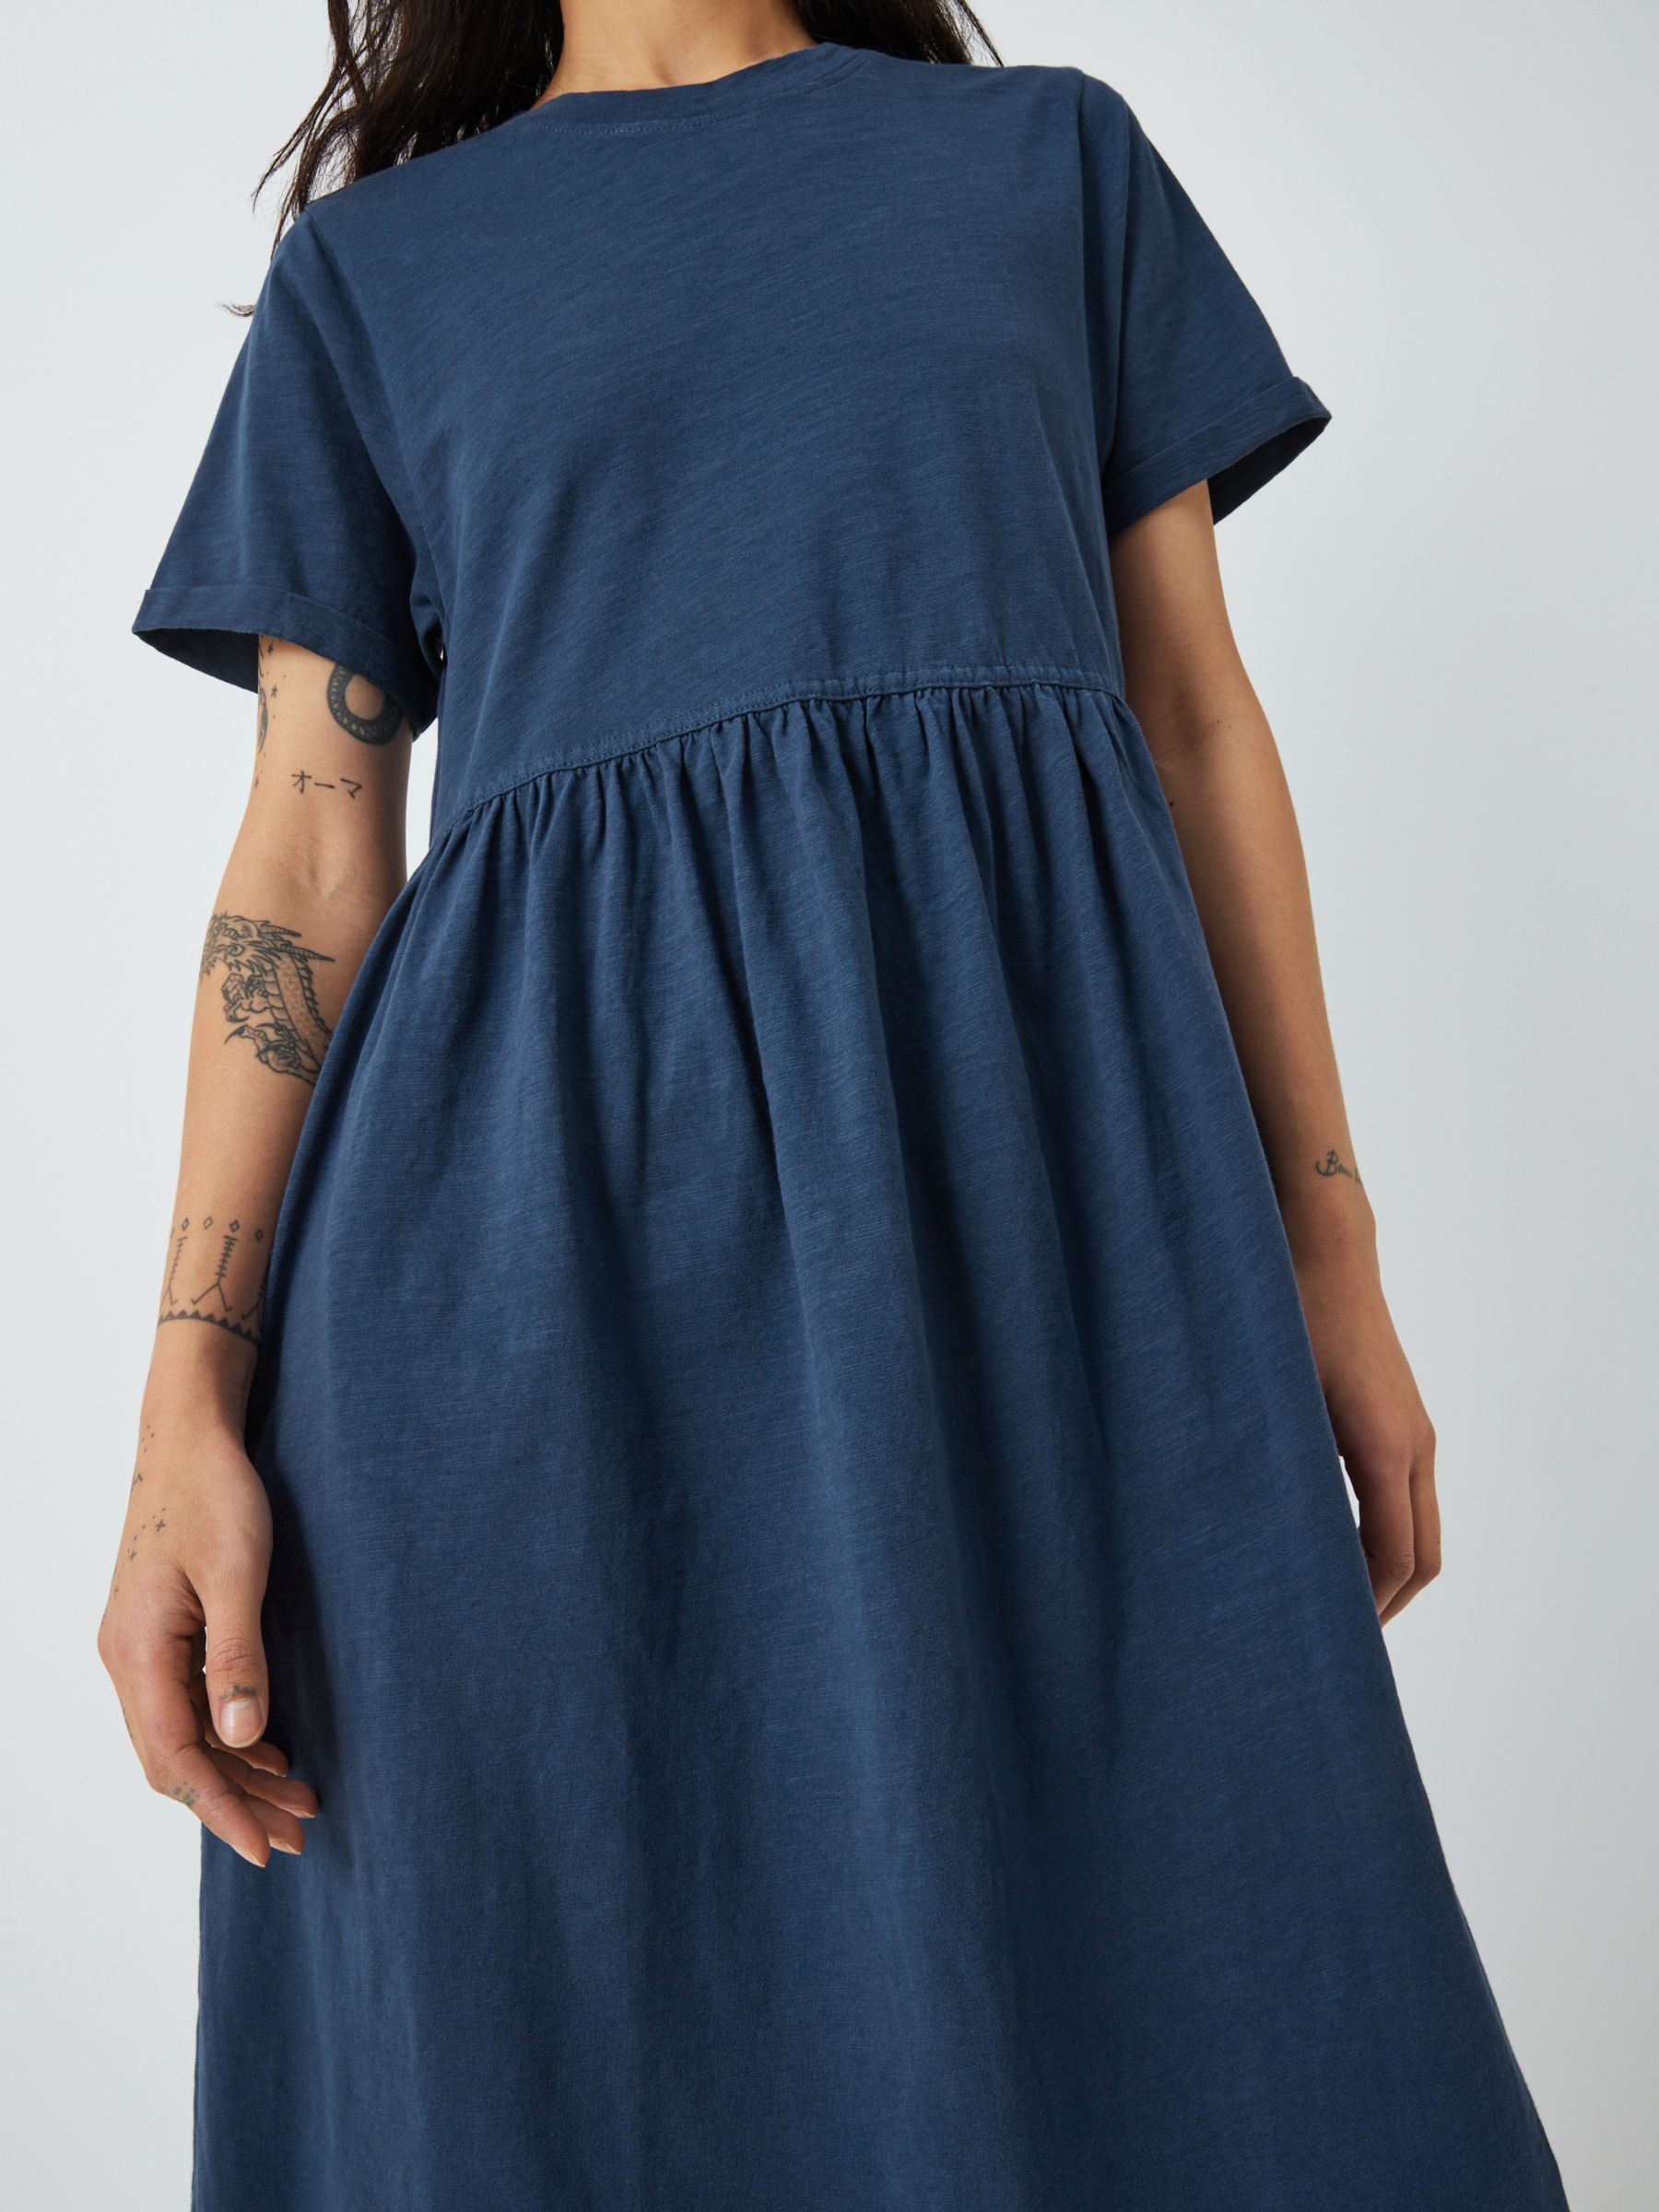 AND/OR Anna Jersey Smock Dress, Denim Blue at John Lewis & Partners